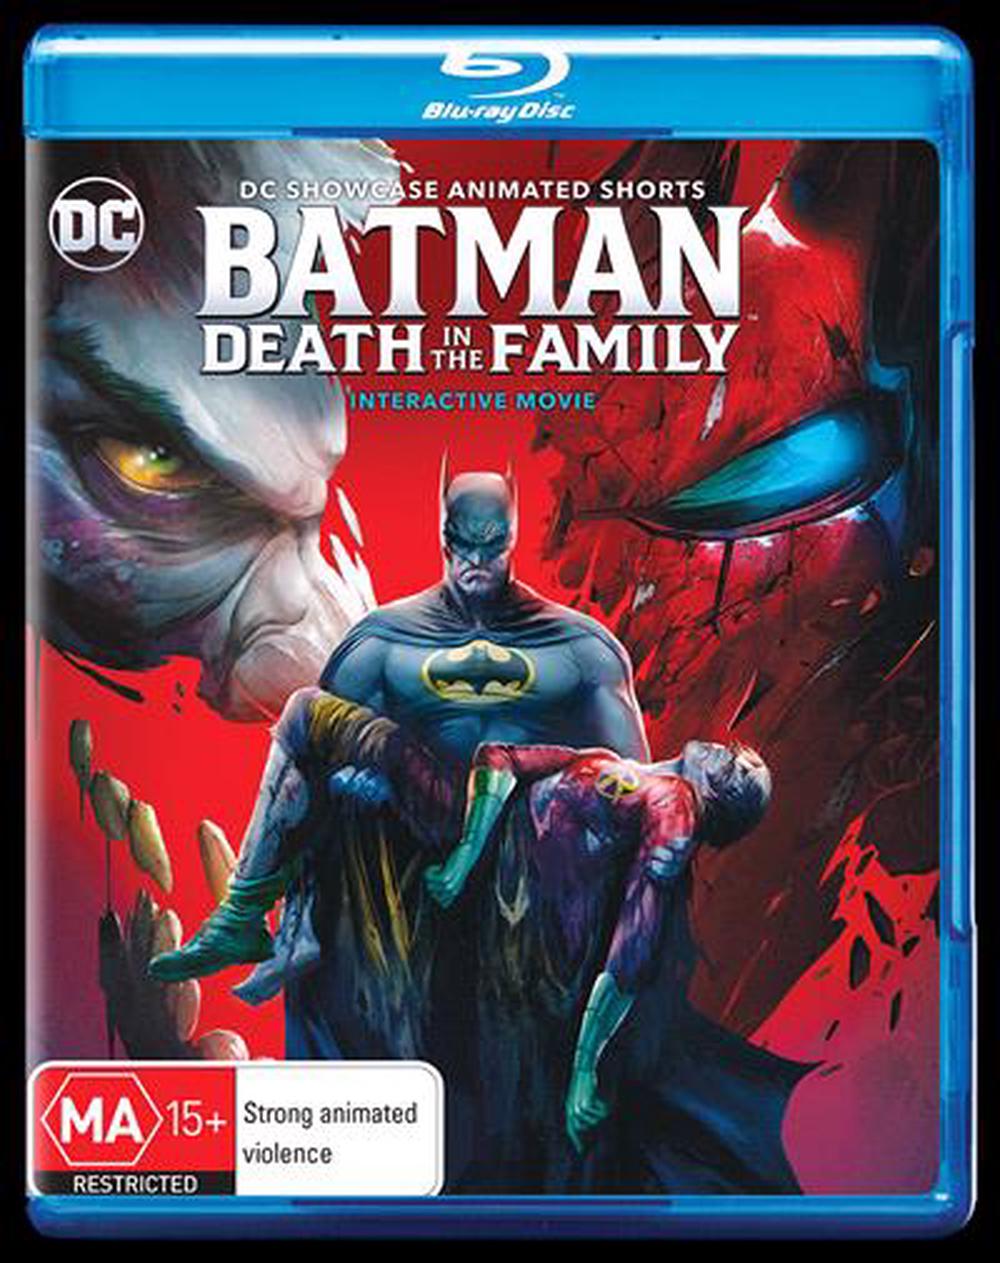 DCU - Batman - Death In The Family, Blu-Ray | Buy online at The Nile